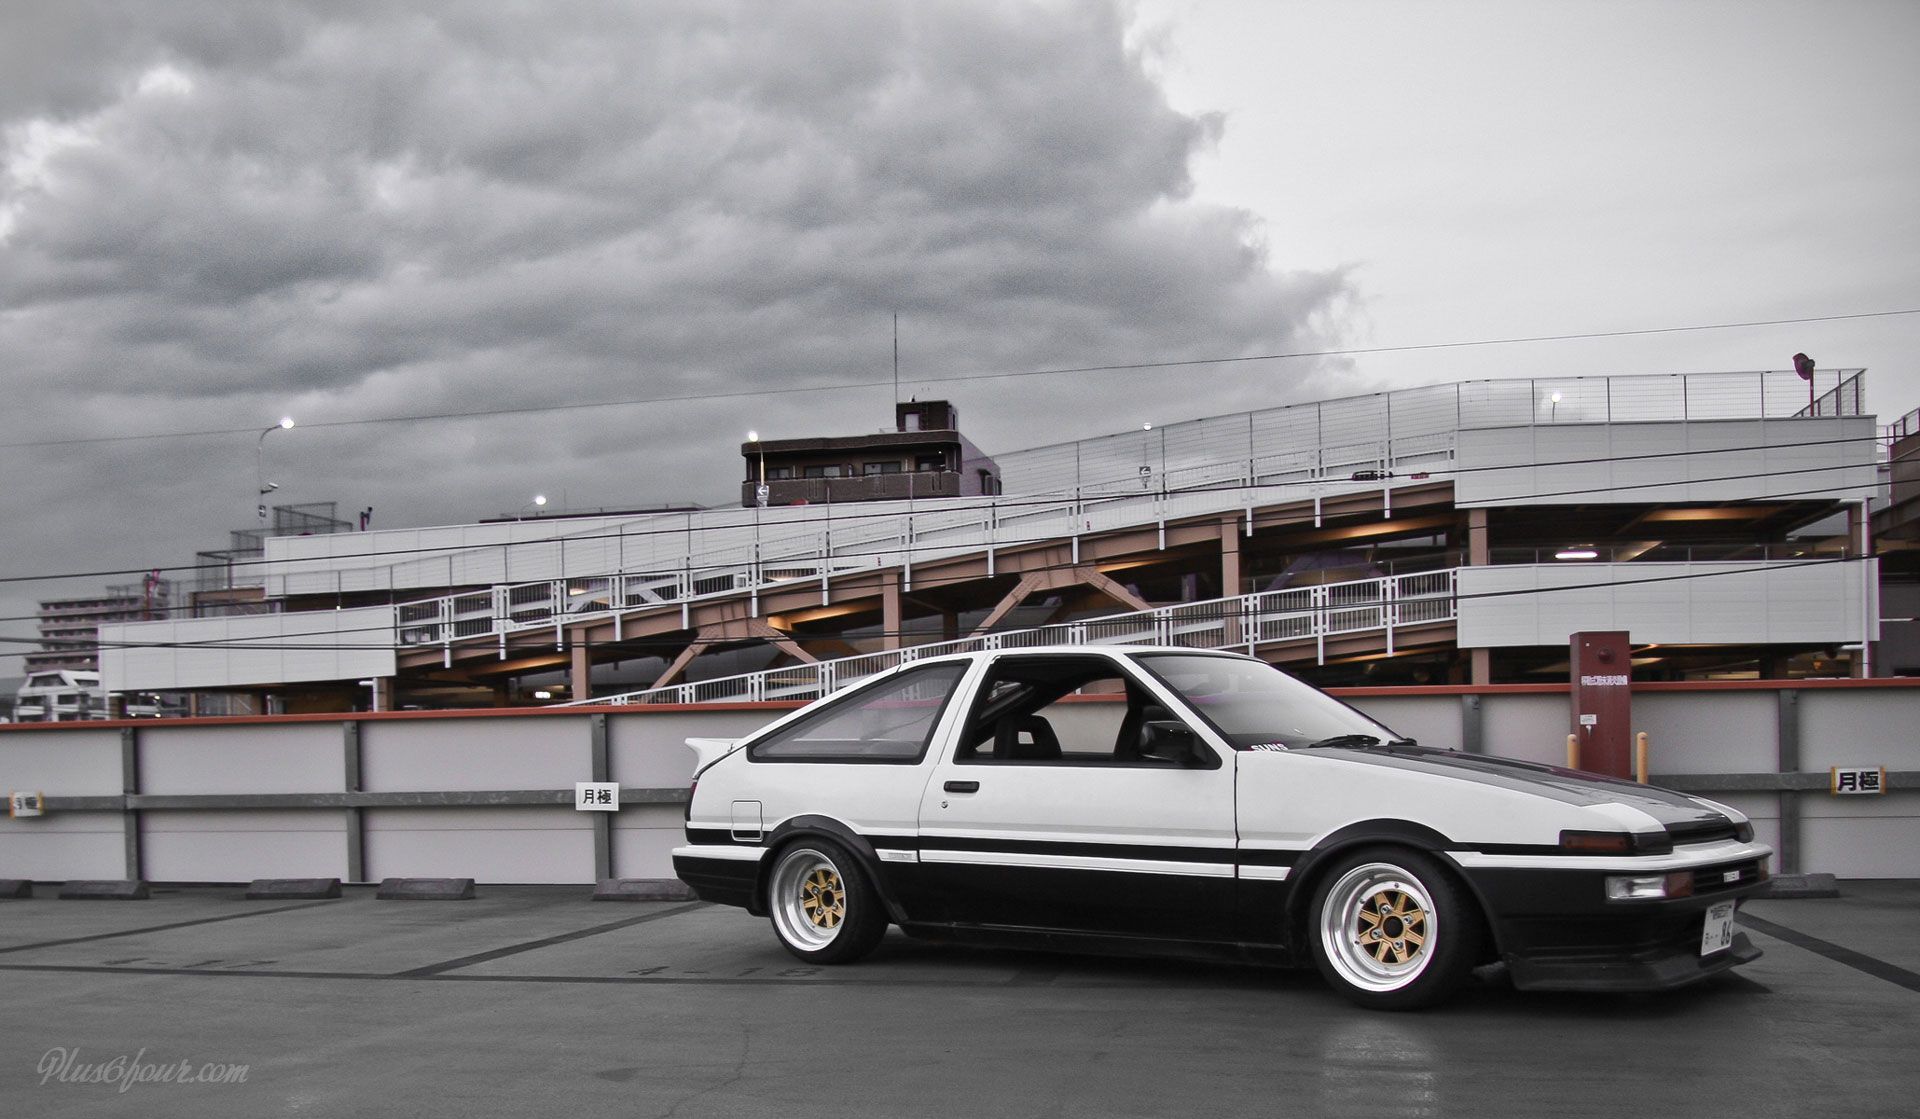 Toyota Ae86 Wallpapers